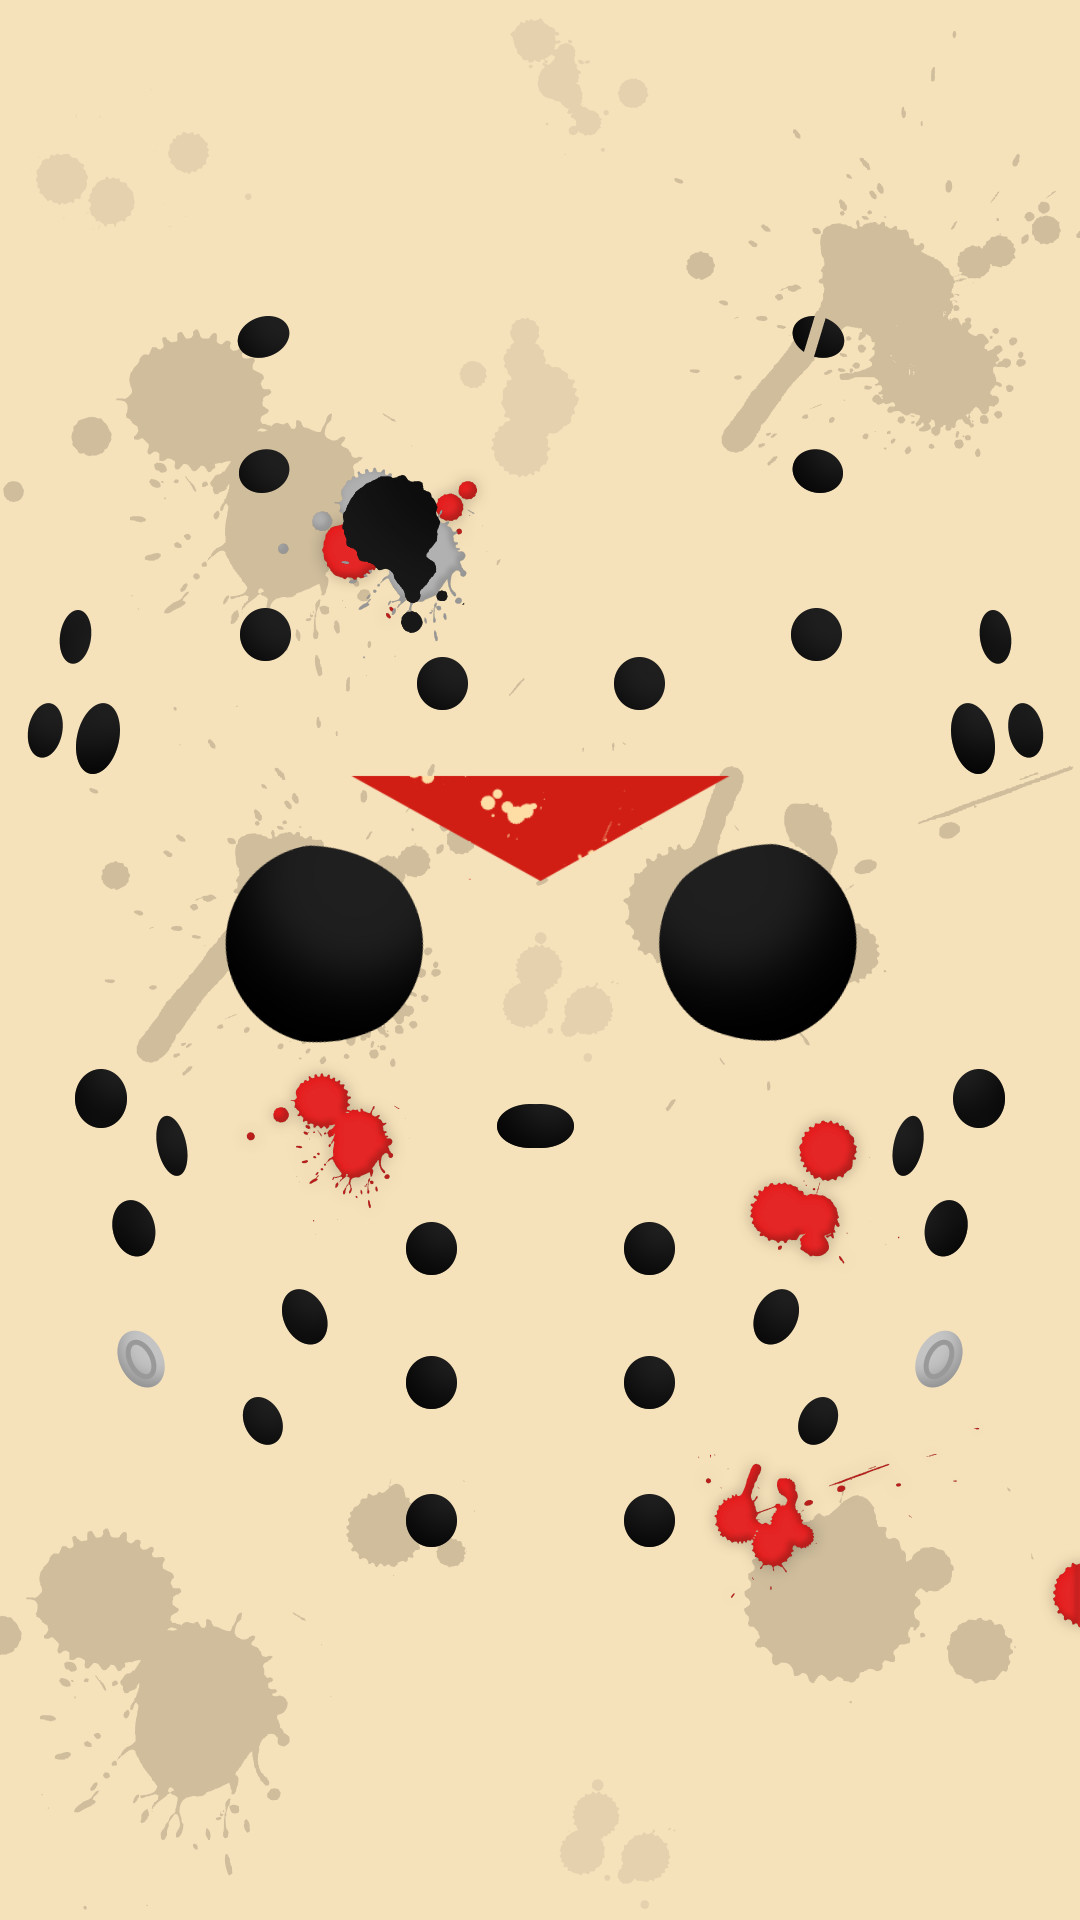 Jason Voorhees wallpaper by TheSpawner97  Download on ZEDGE  13eb  Jason  voorhees wallpaper Jason voorhees Horror characters